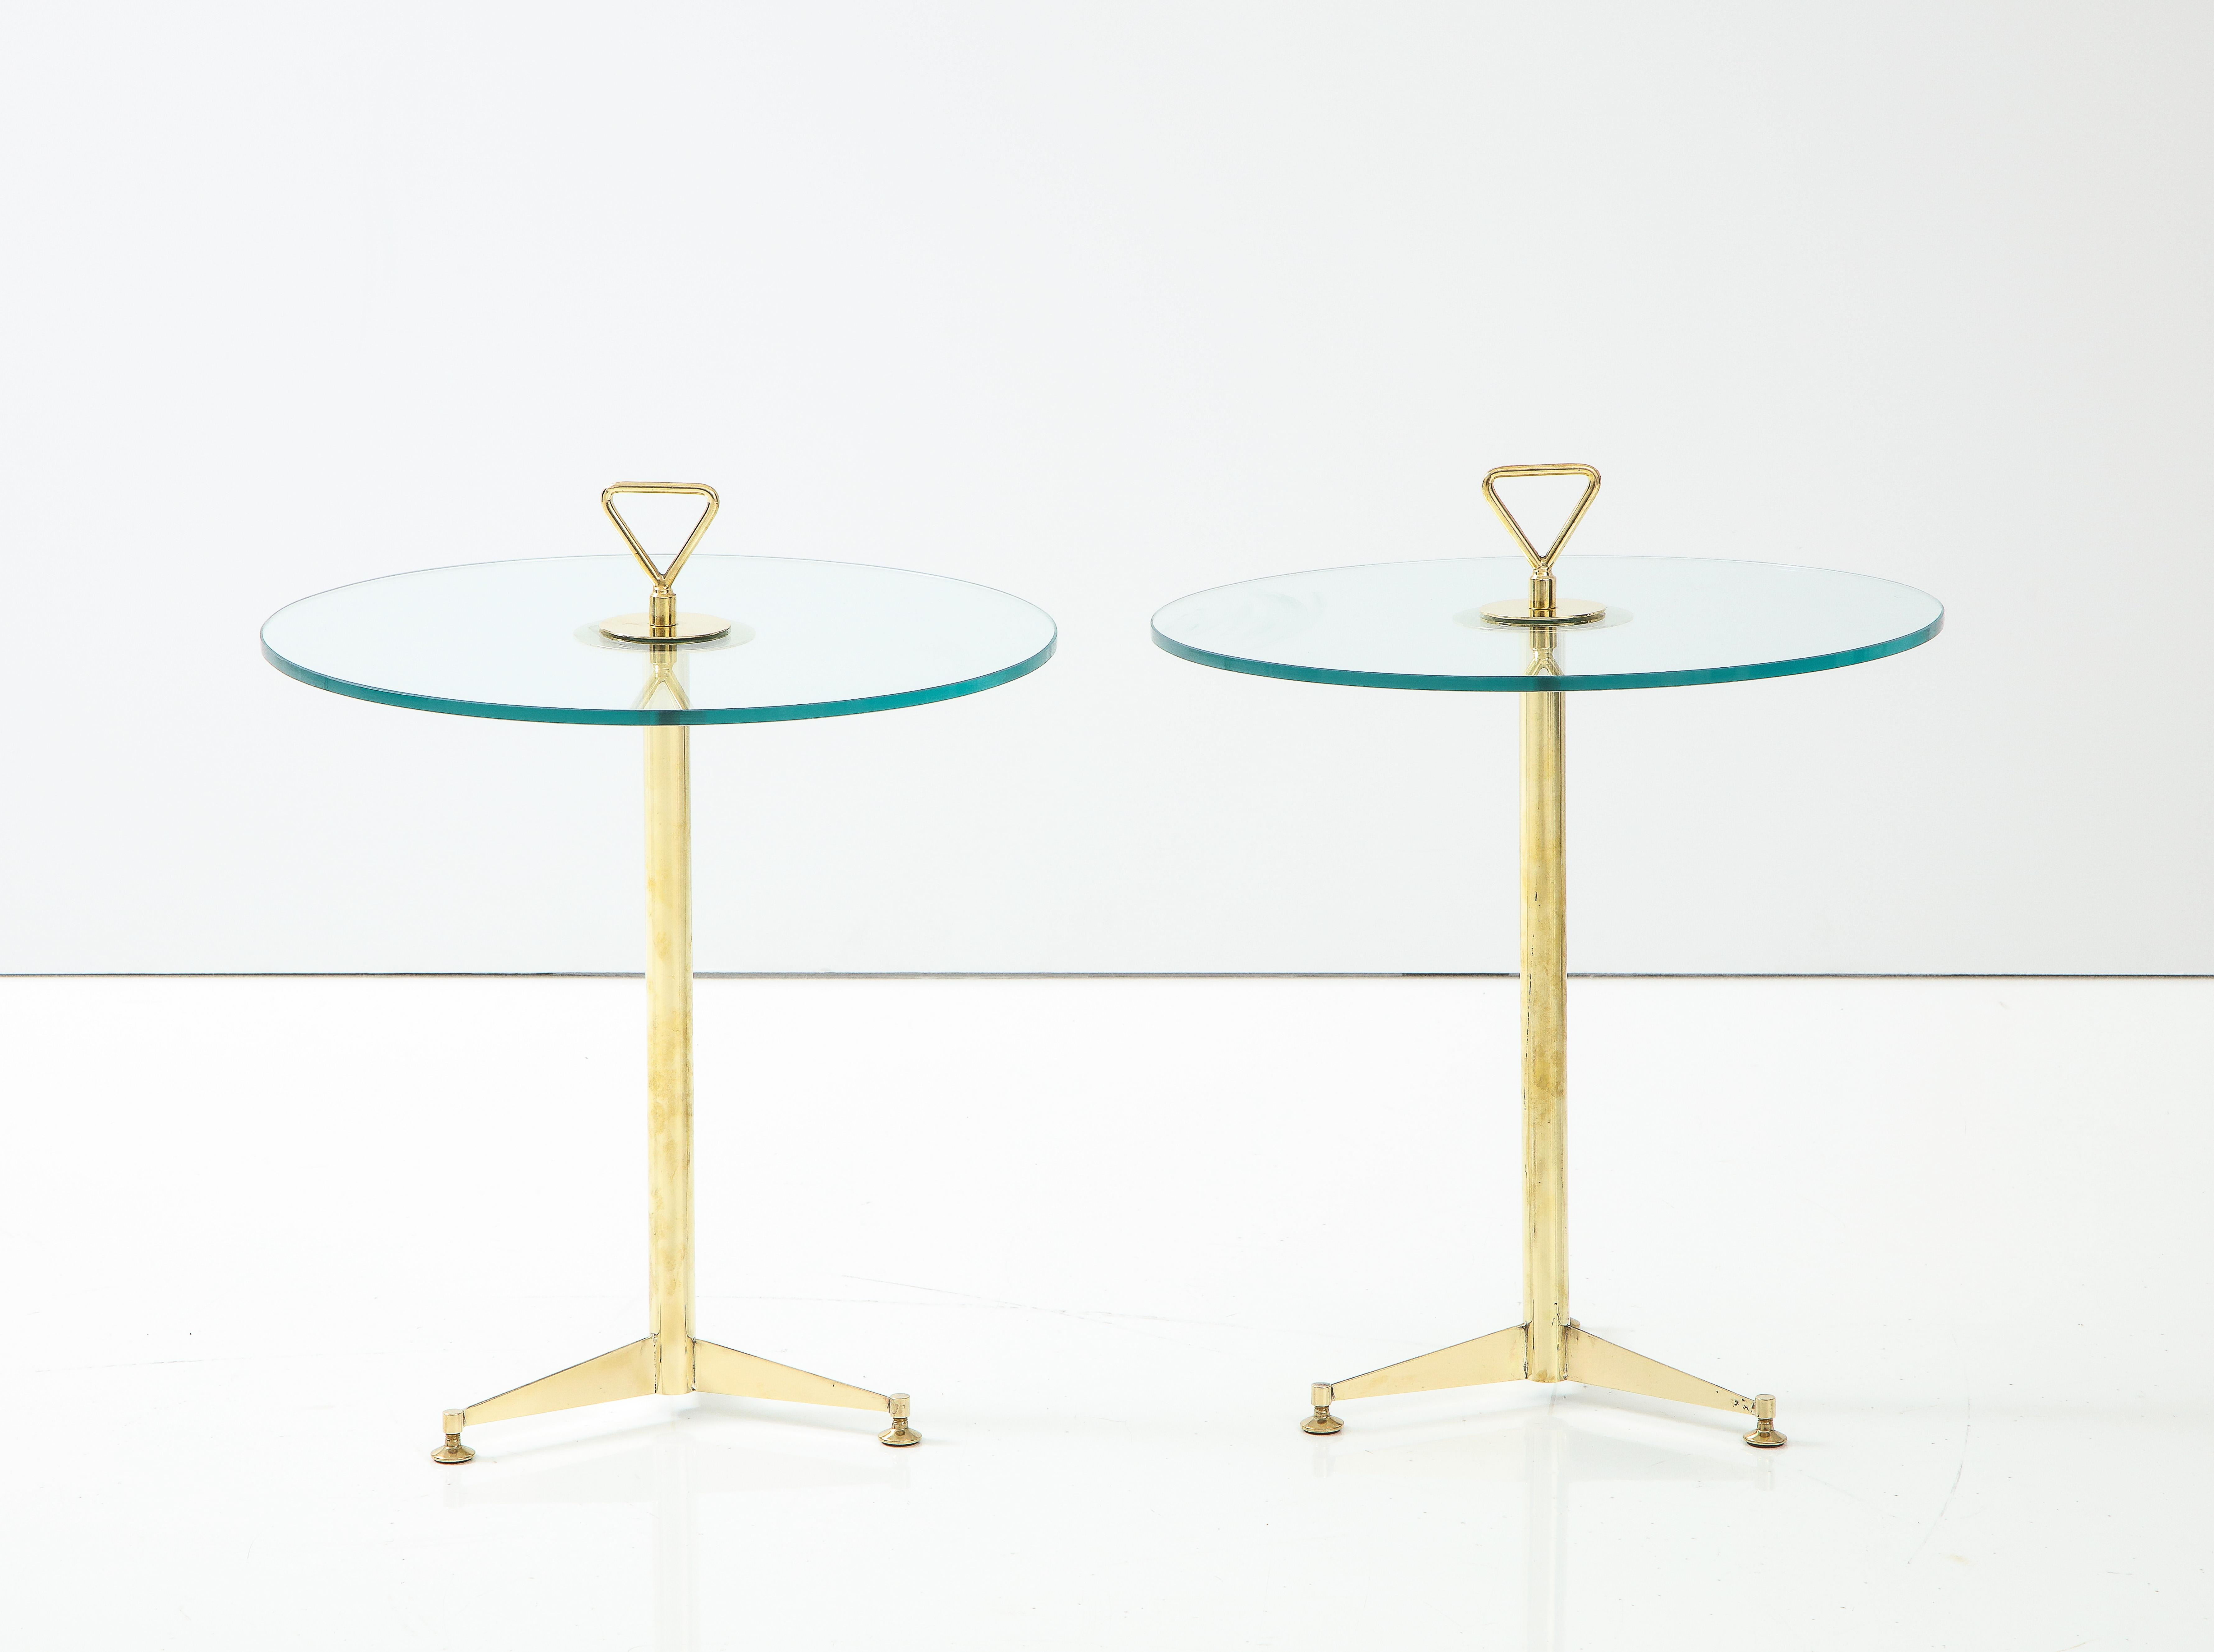 Pair of Italian brass martini side tables with clear round glass tops. Tripod brass base and with brass handle. Handcrafted in Italy of solid brass. Minimalist and clean lines. Overall height of table, including handle is 22.5